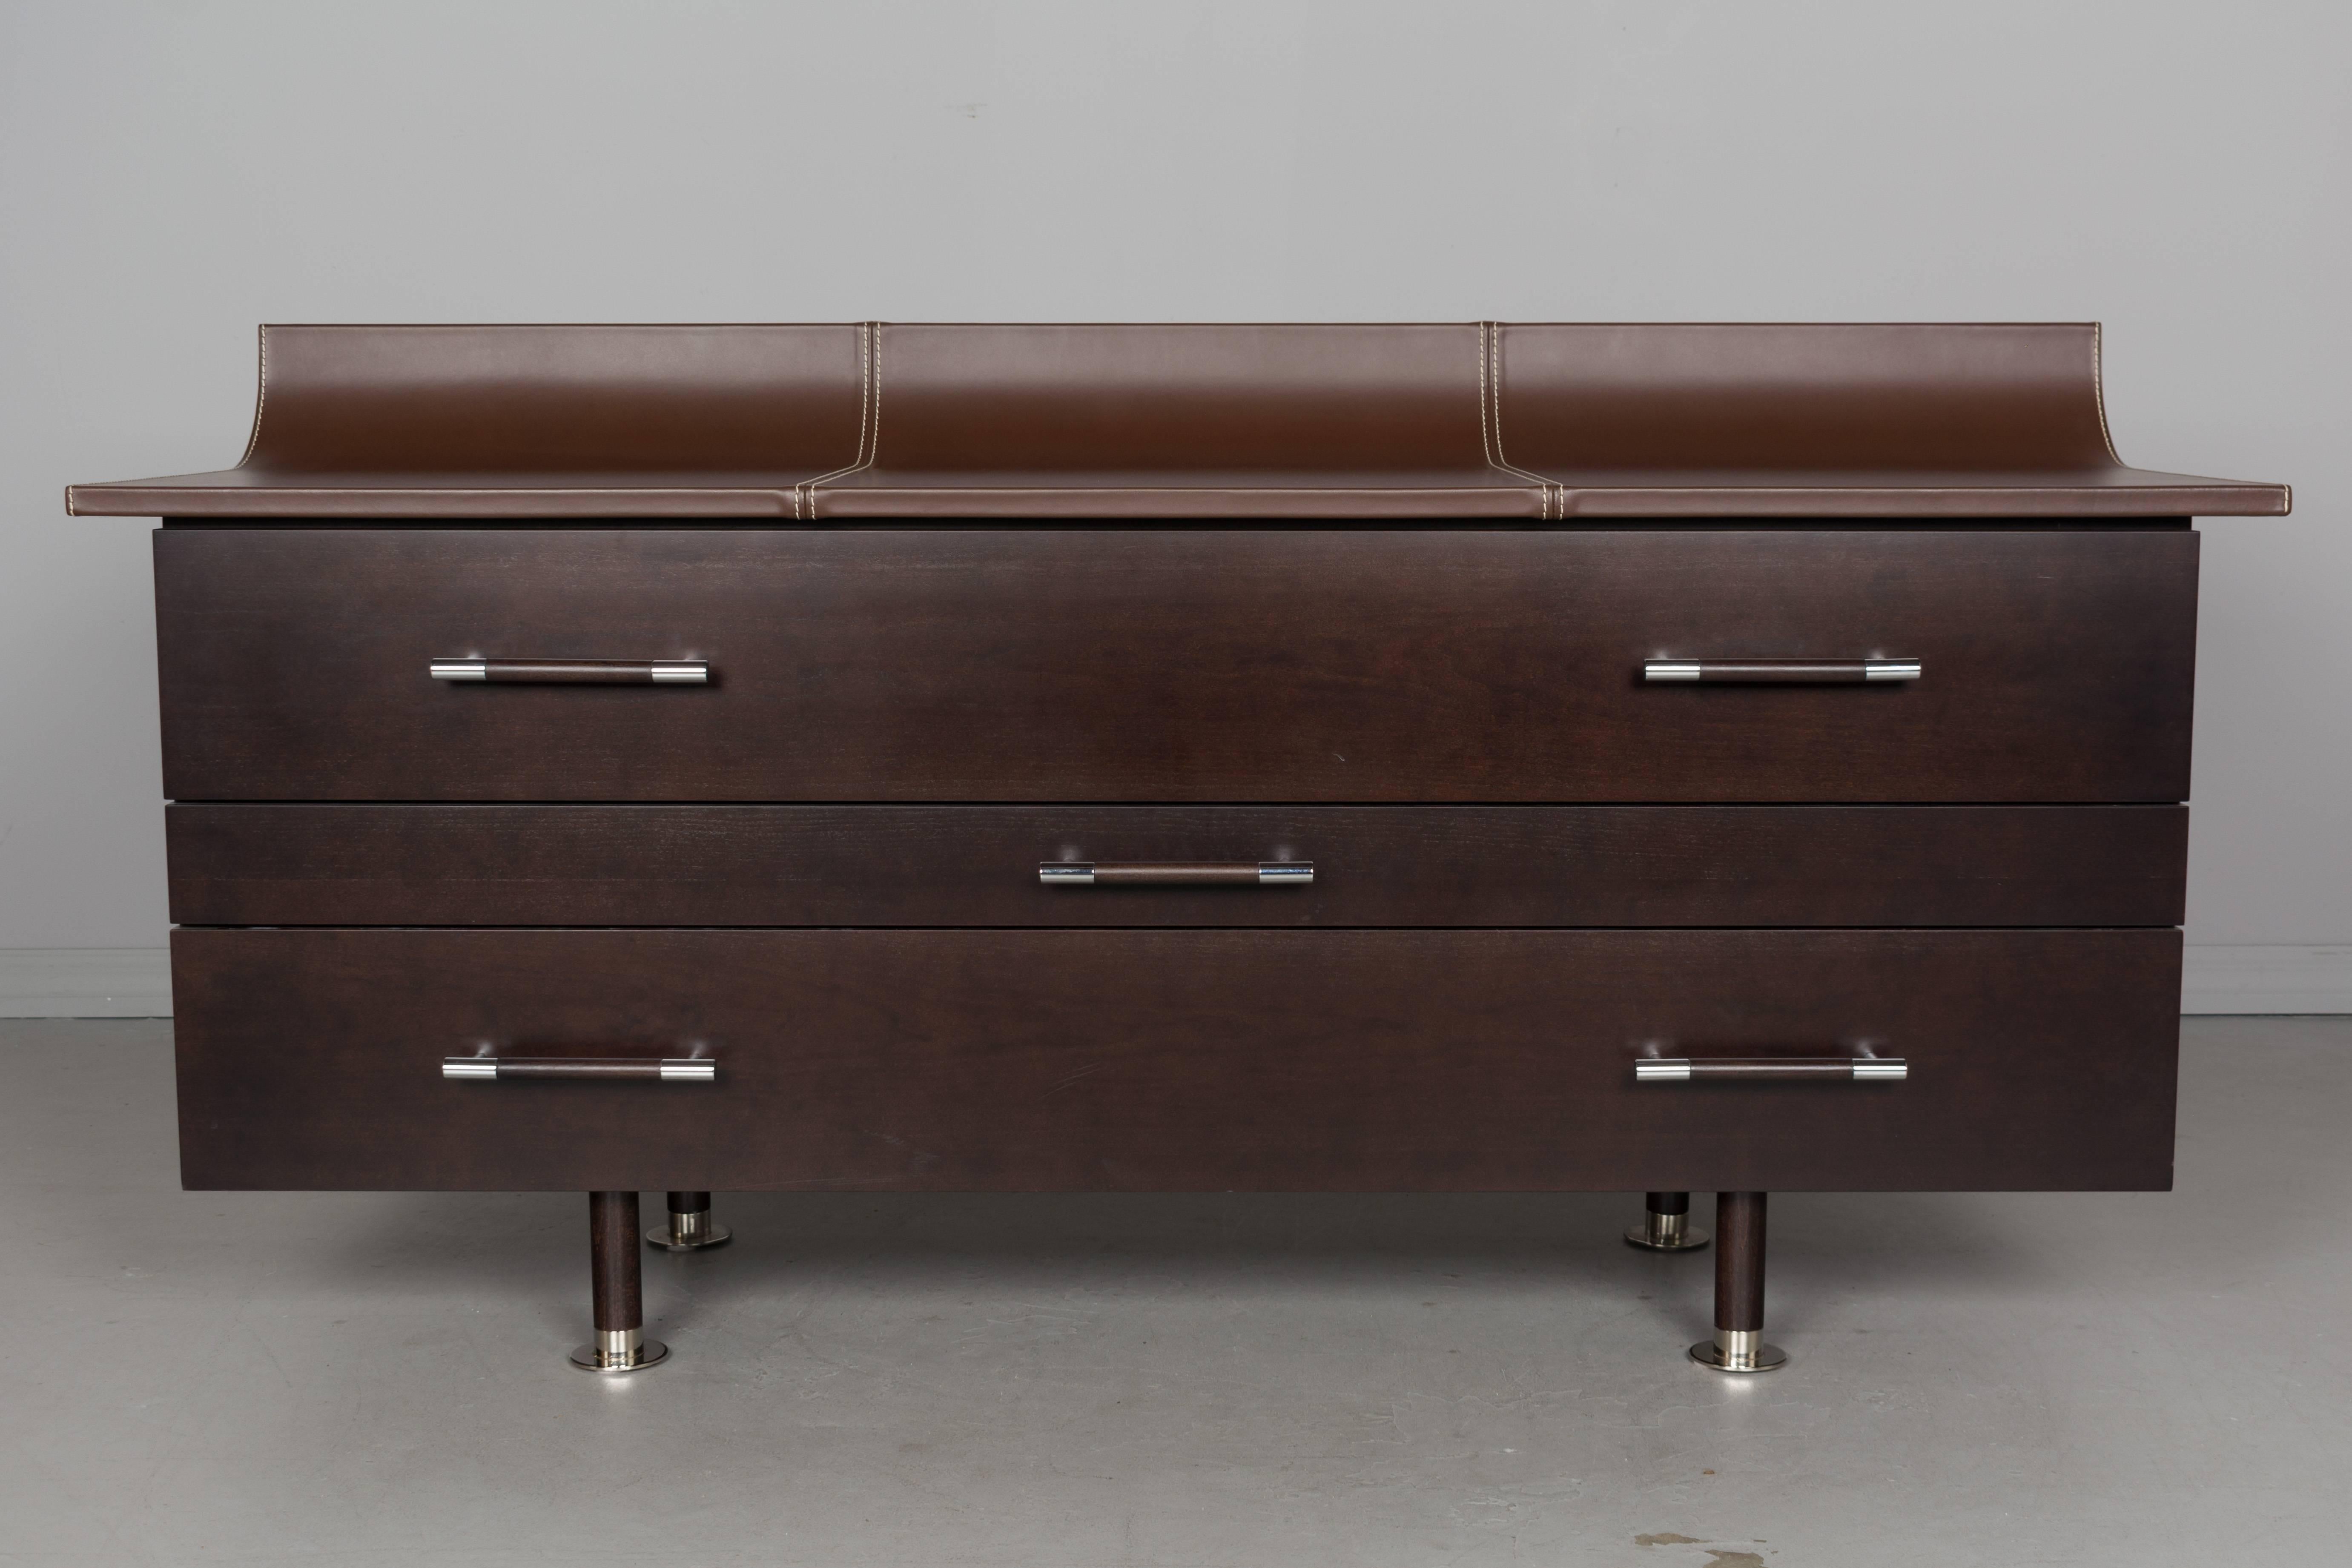 A contemporary dresser from the vanity bedroom collection for Roche Bobois by Milanese designer-architect Luigi Gorgoni. This three-drawer chest is made of cherry wood veneer with a top upholstered in split leather with contrasting stitching.